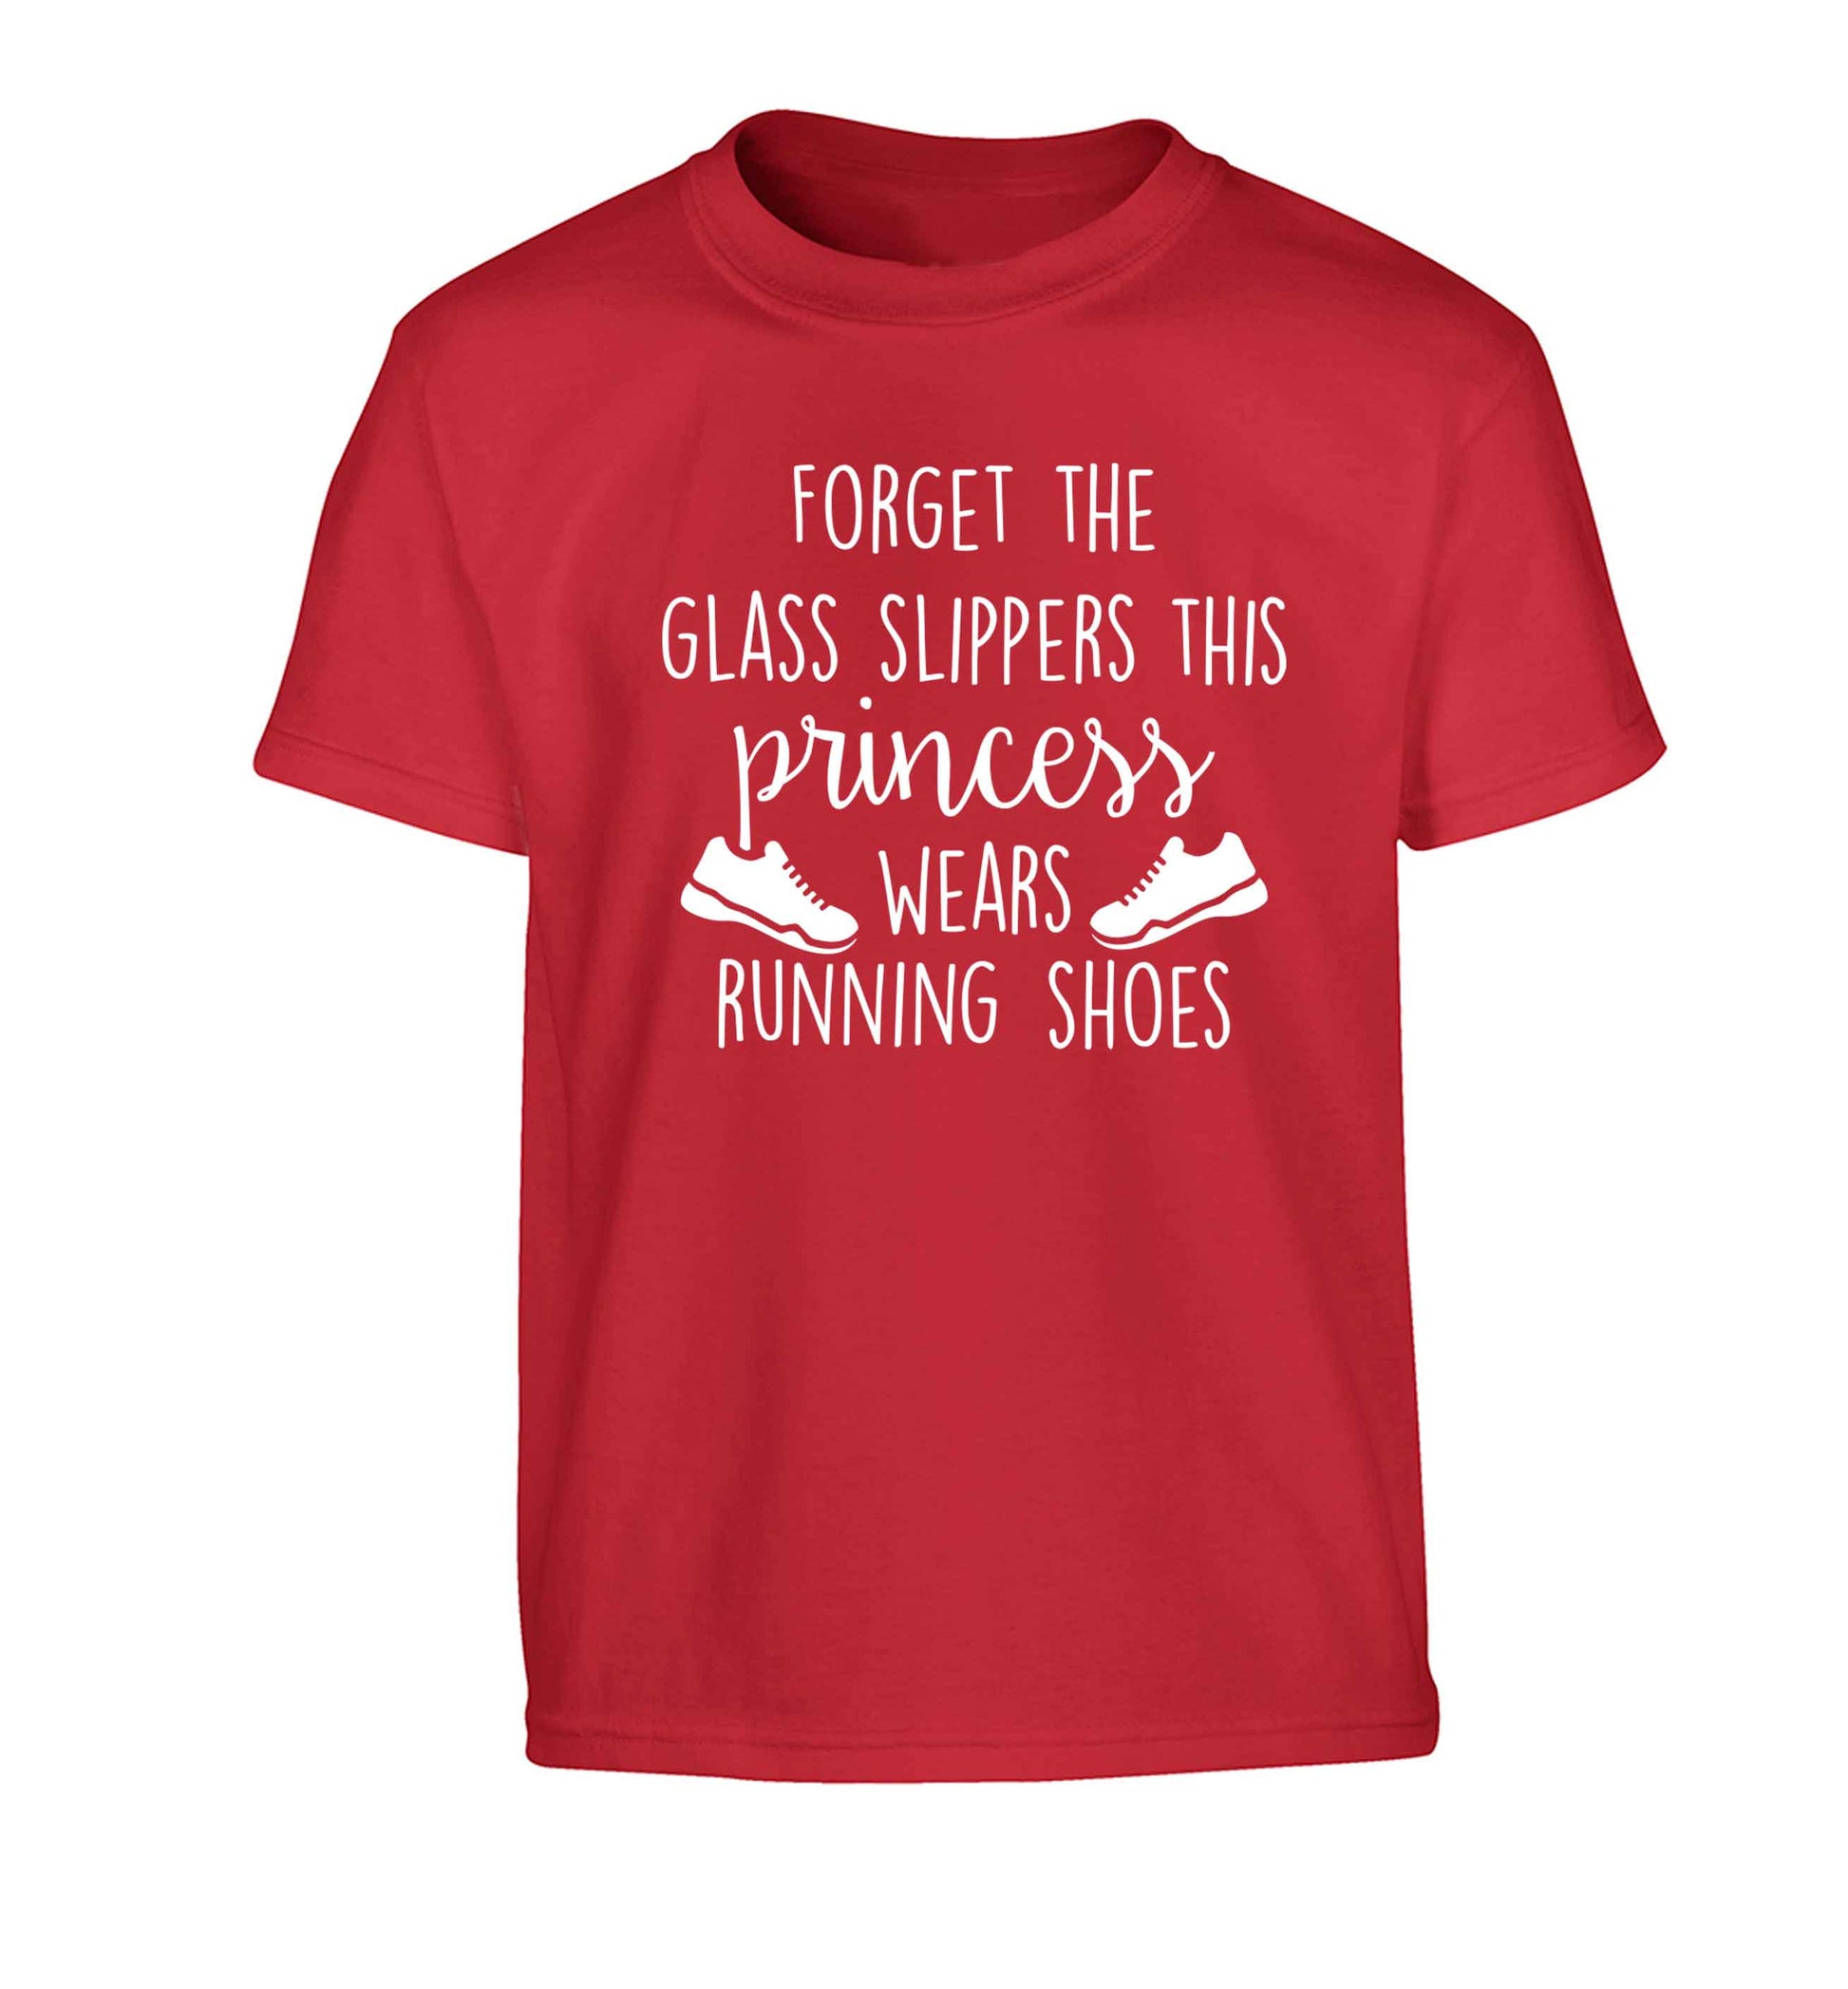 Forget the glass slippers this princess wears running shoes Children's red Tshirt 12-13 Years